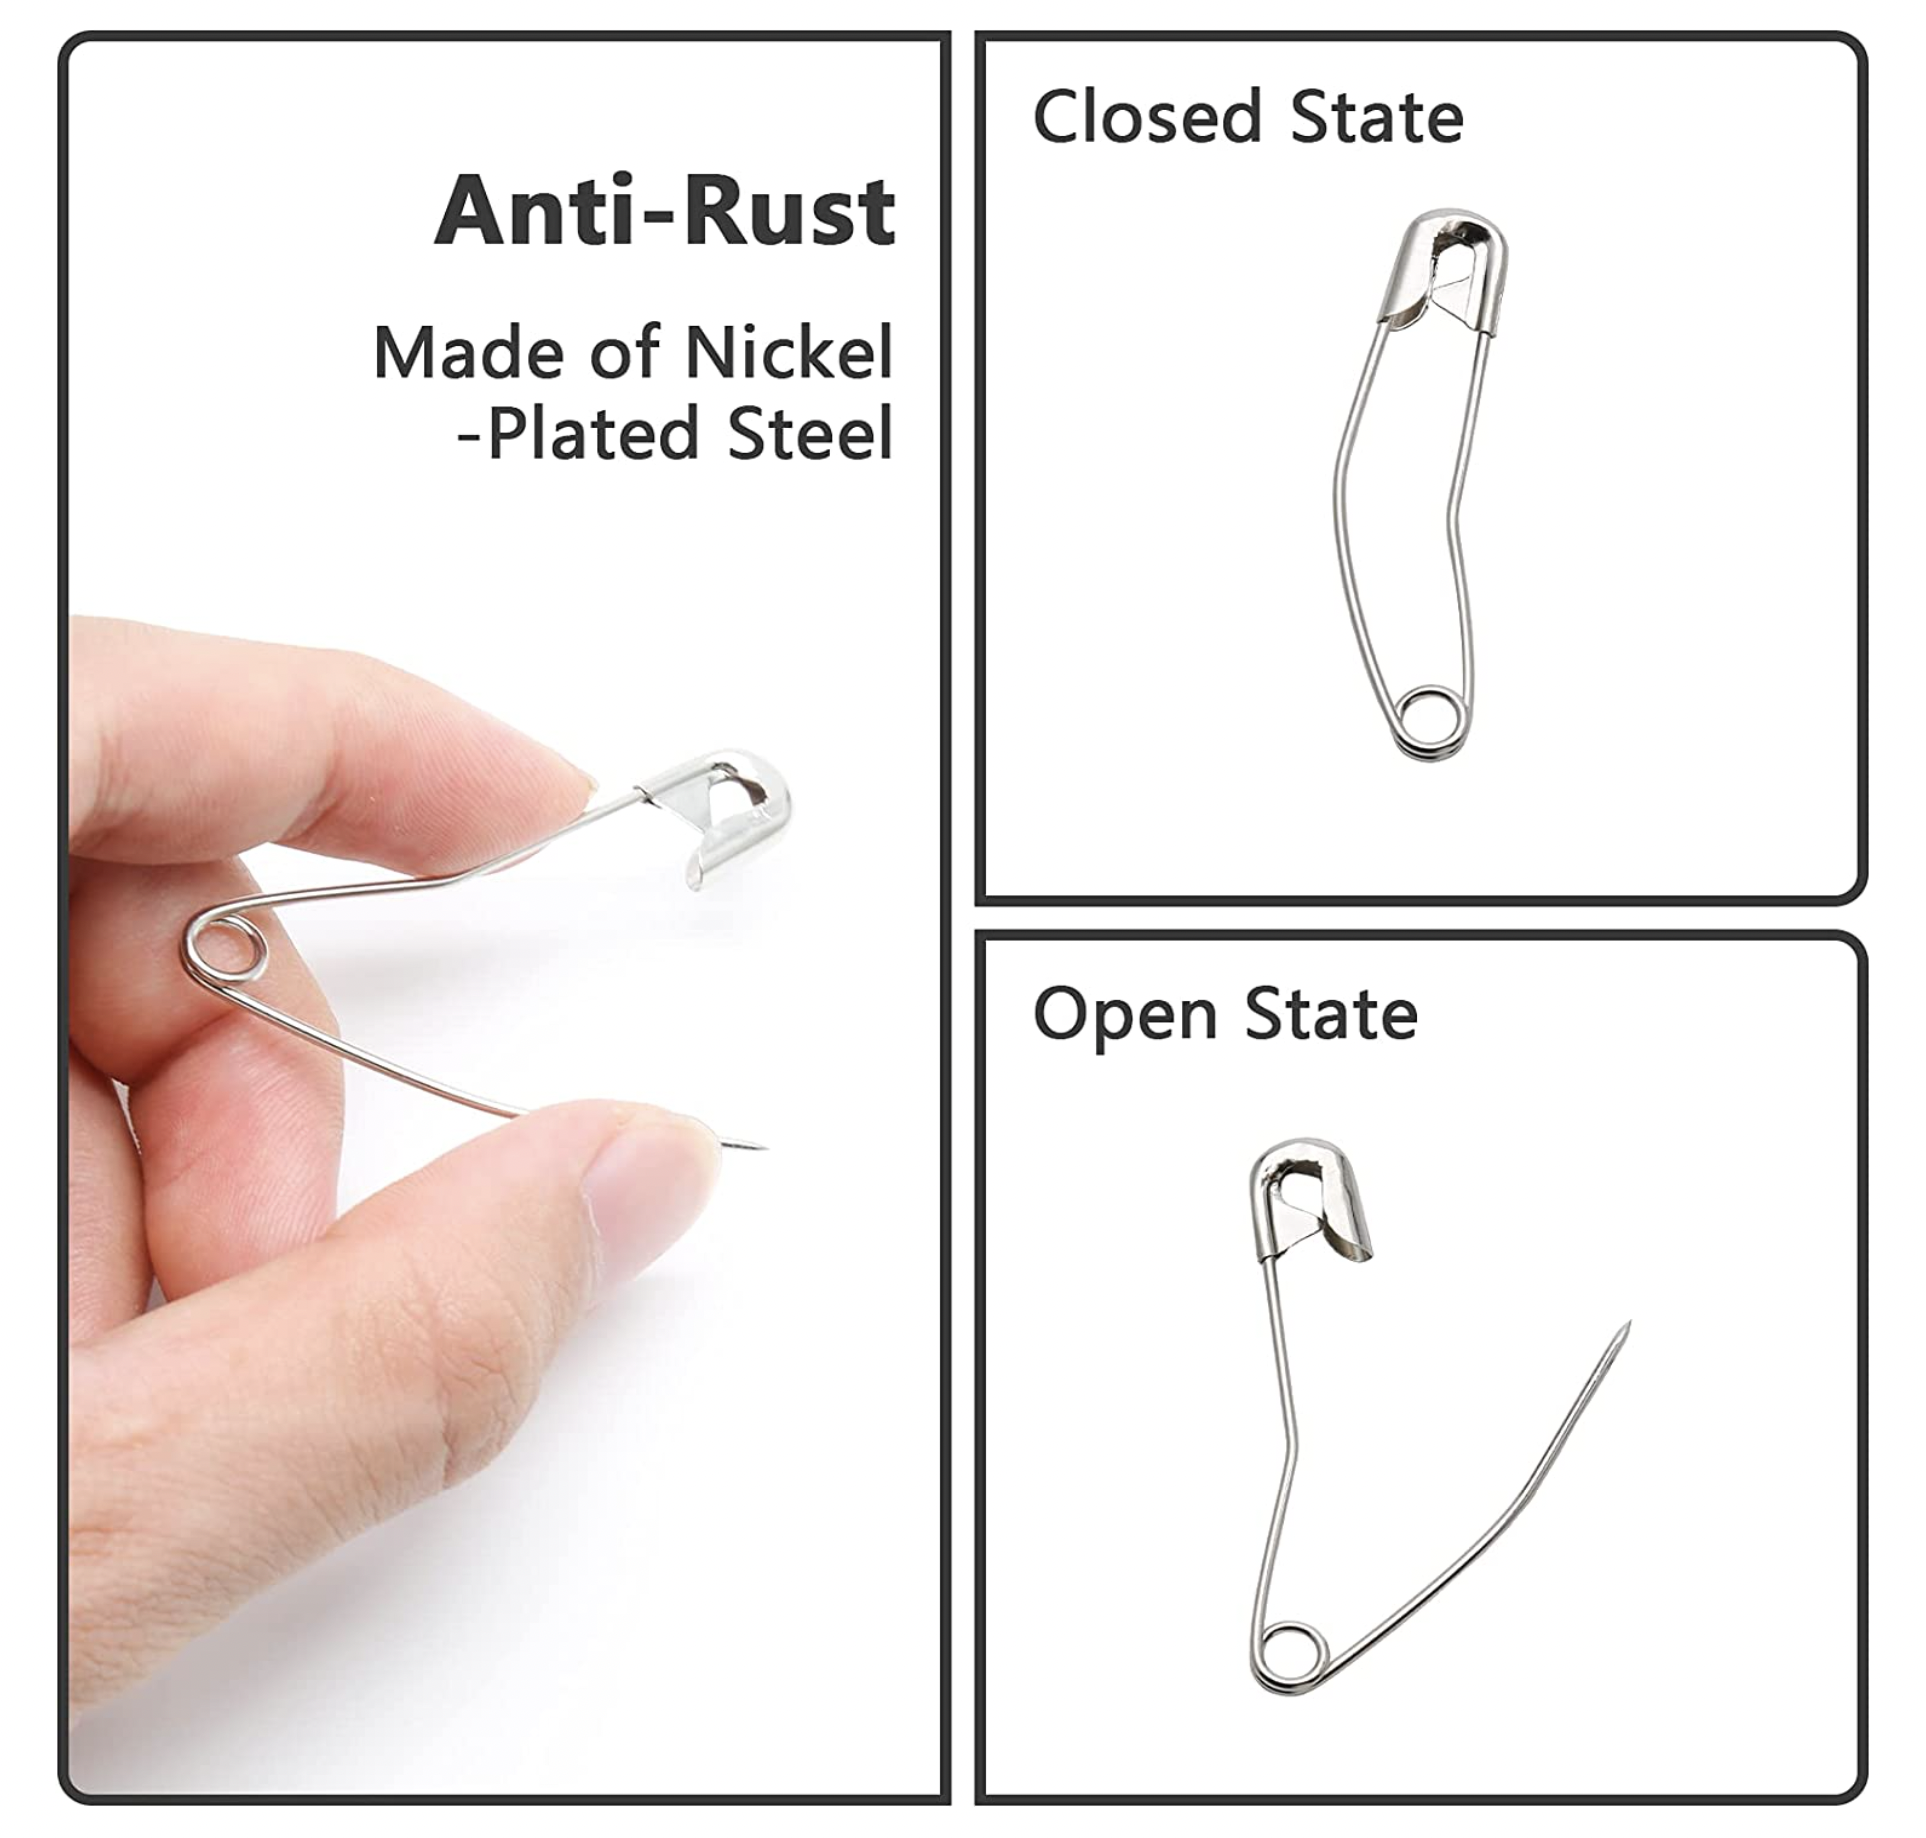 Curved Safety Pins - Anti-Rust - Image - Quiltblox.com